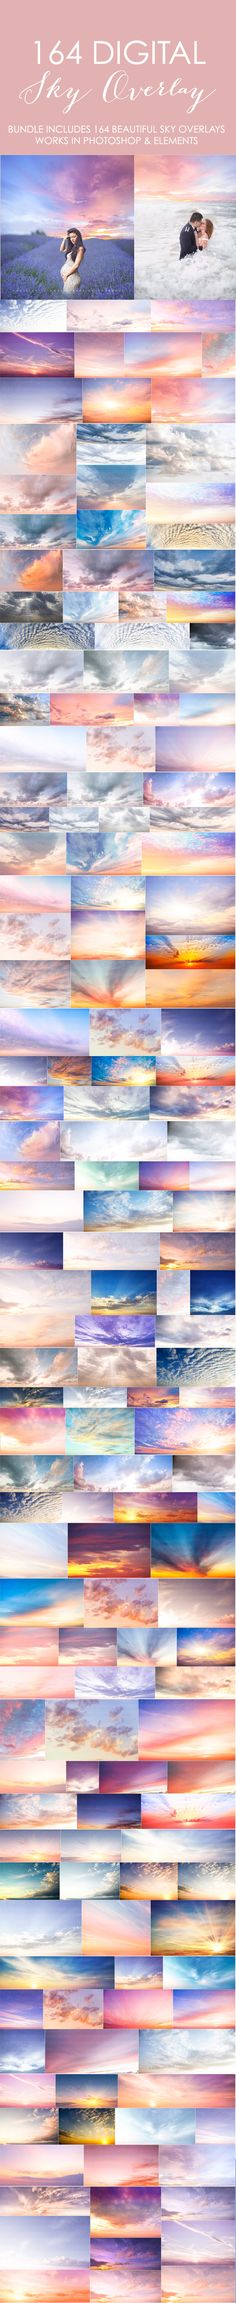 These are STUNNING!!! Bundle includes 164 beautiful sky overlays. Just choose your sky, copy and paste it over your own image and then erase what you don&#39;t need. Transform your images into something magical with these sky overlays.